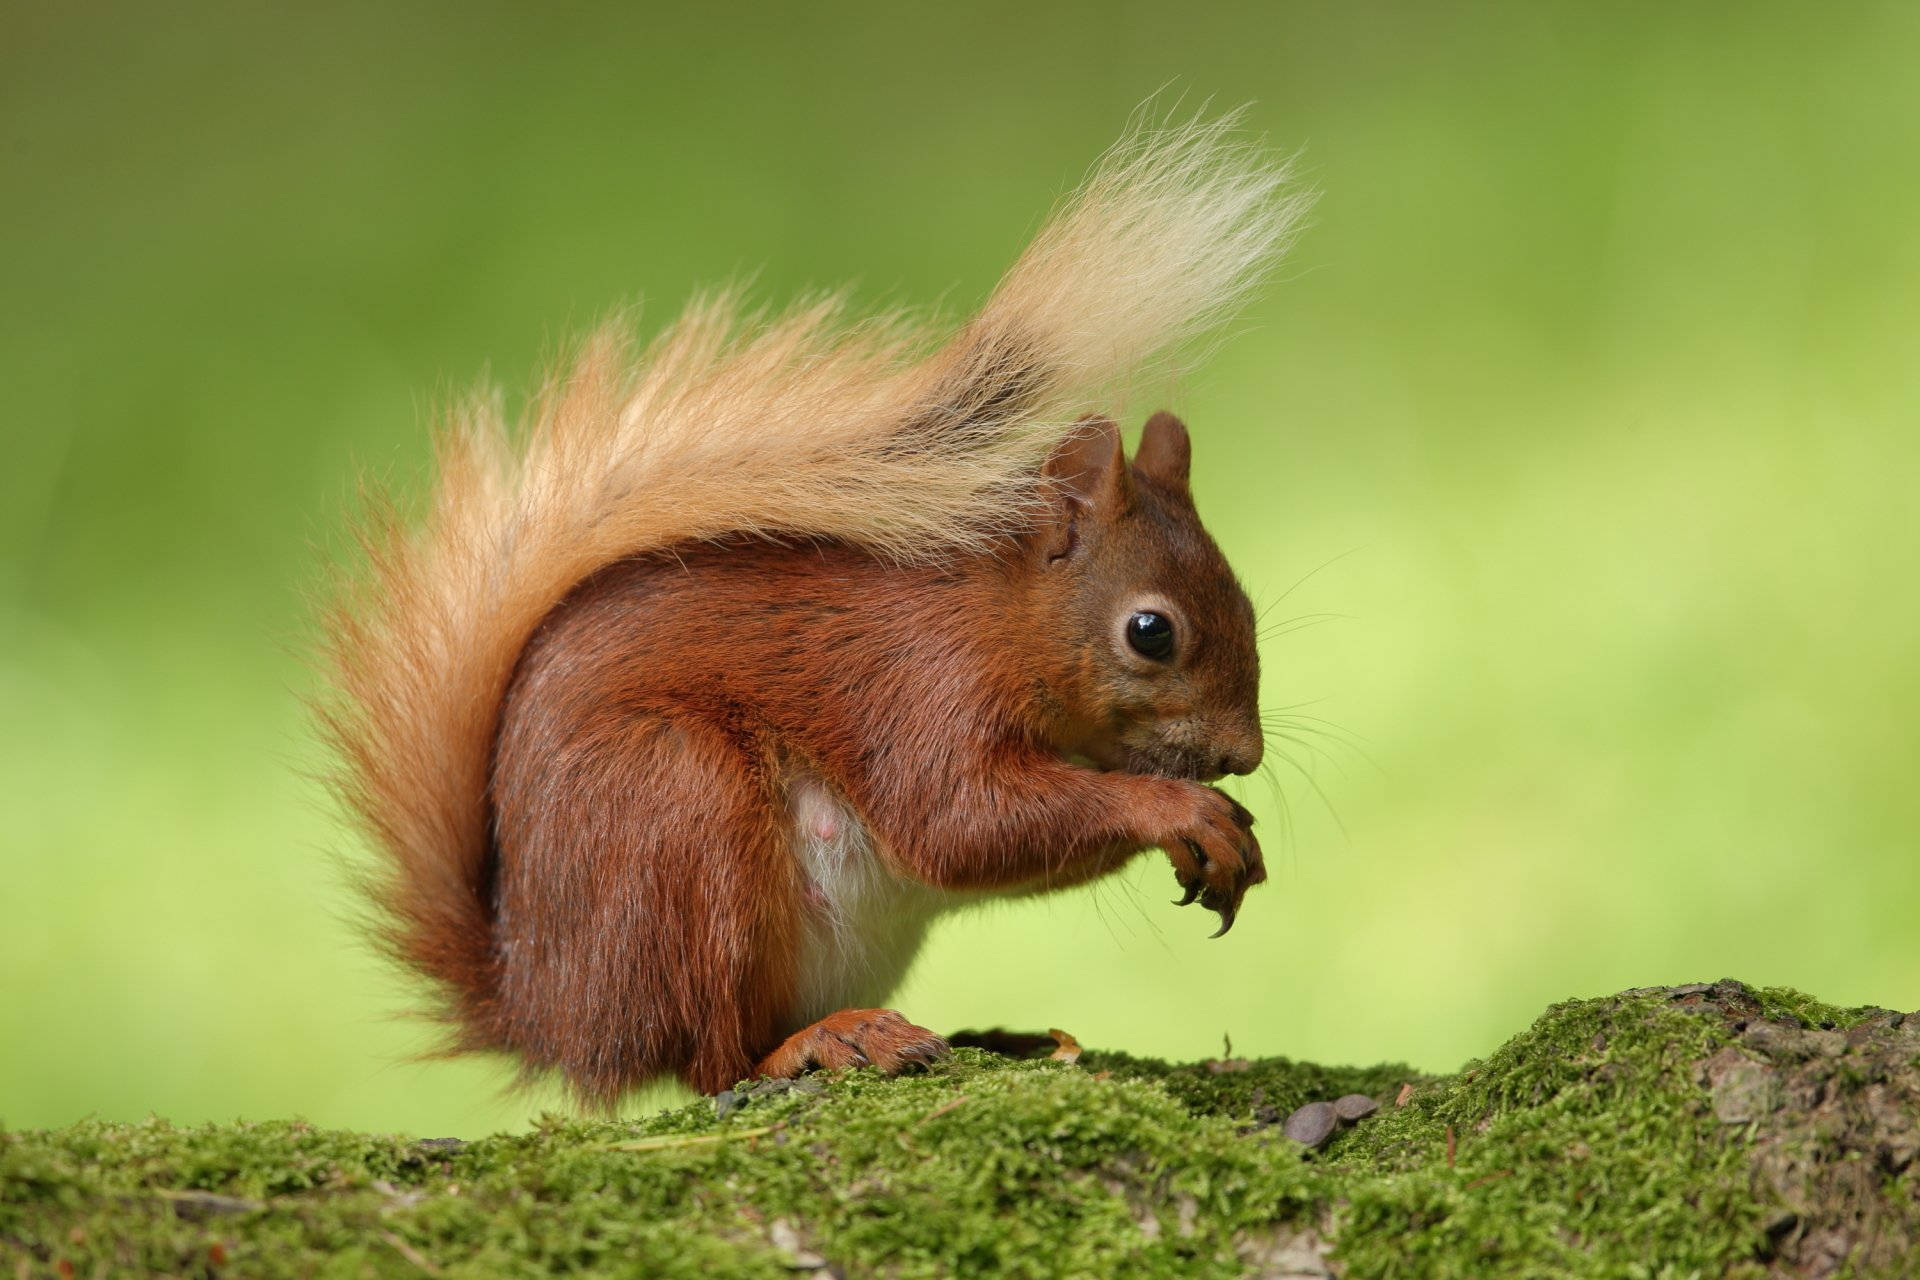 Red Squirrel On Tree Trunk